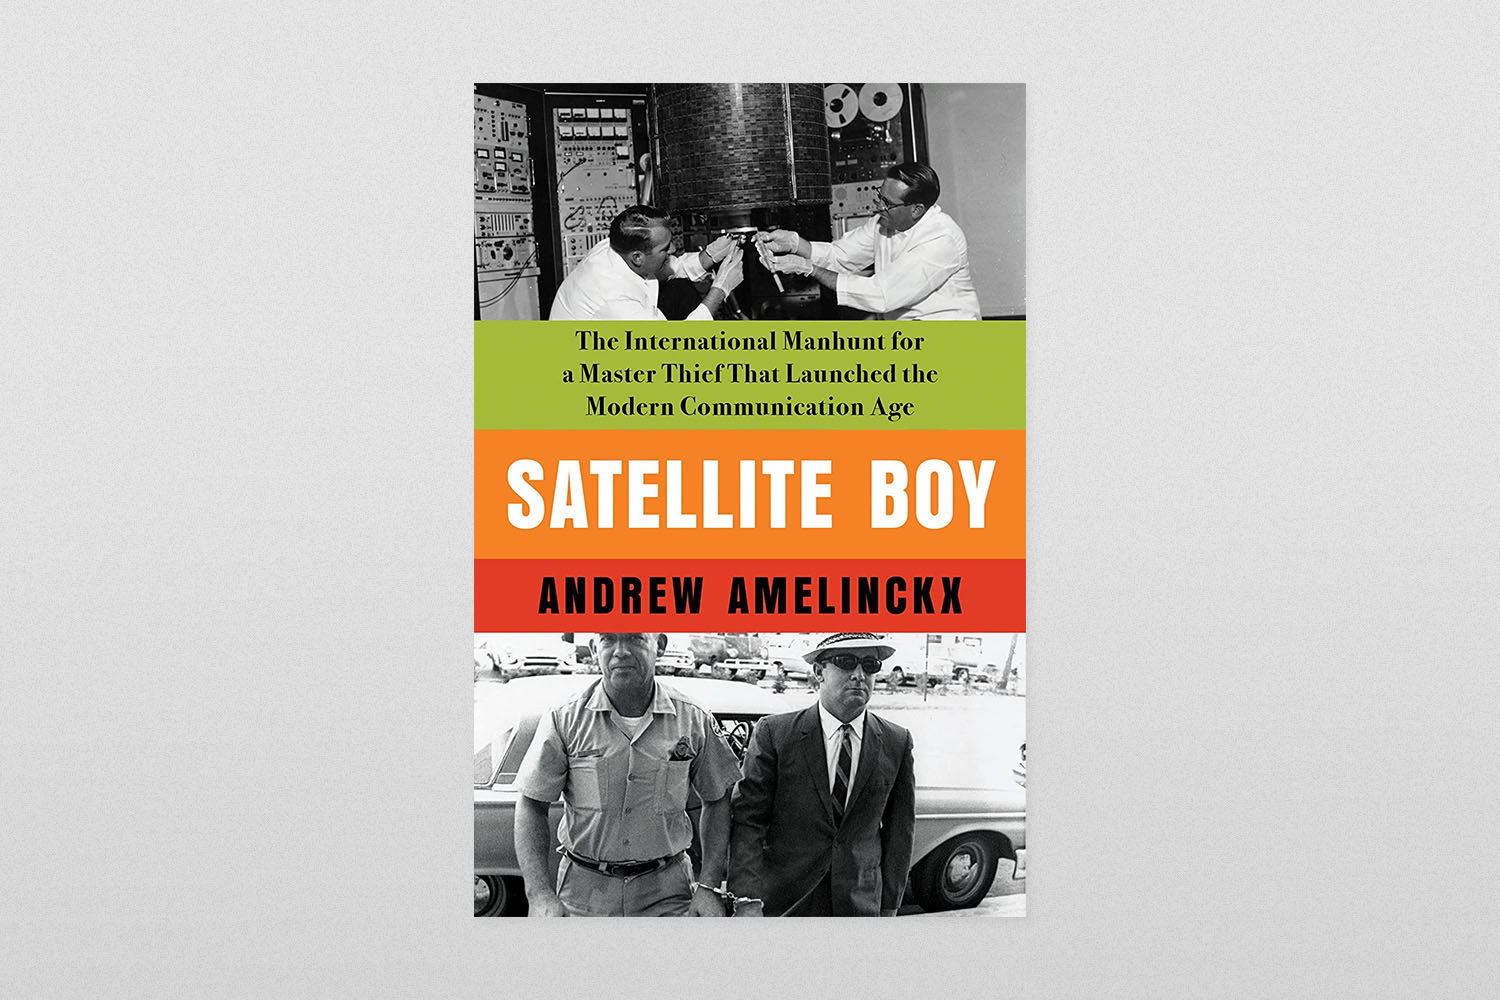 Satellite Boy- The International Manhunt for a Master Thief That Launched the Modern Communication Age